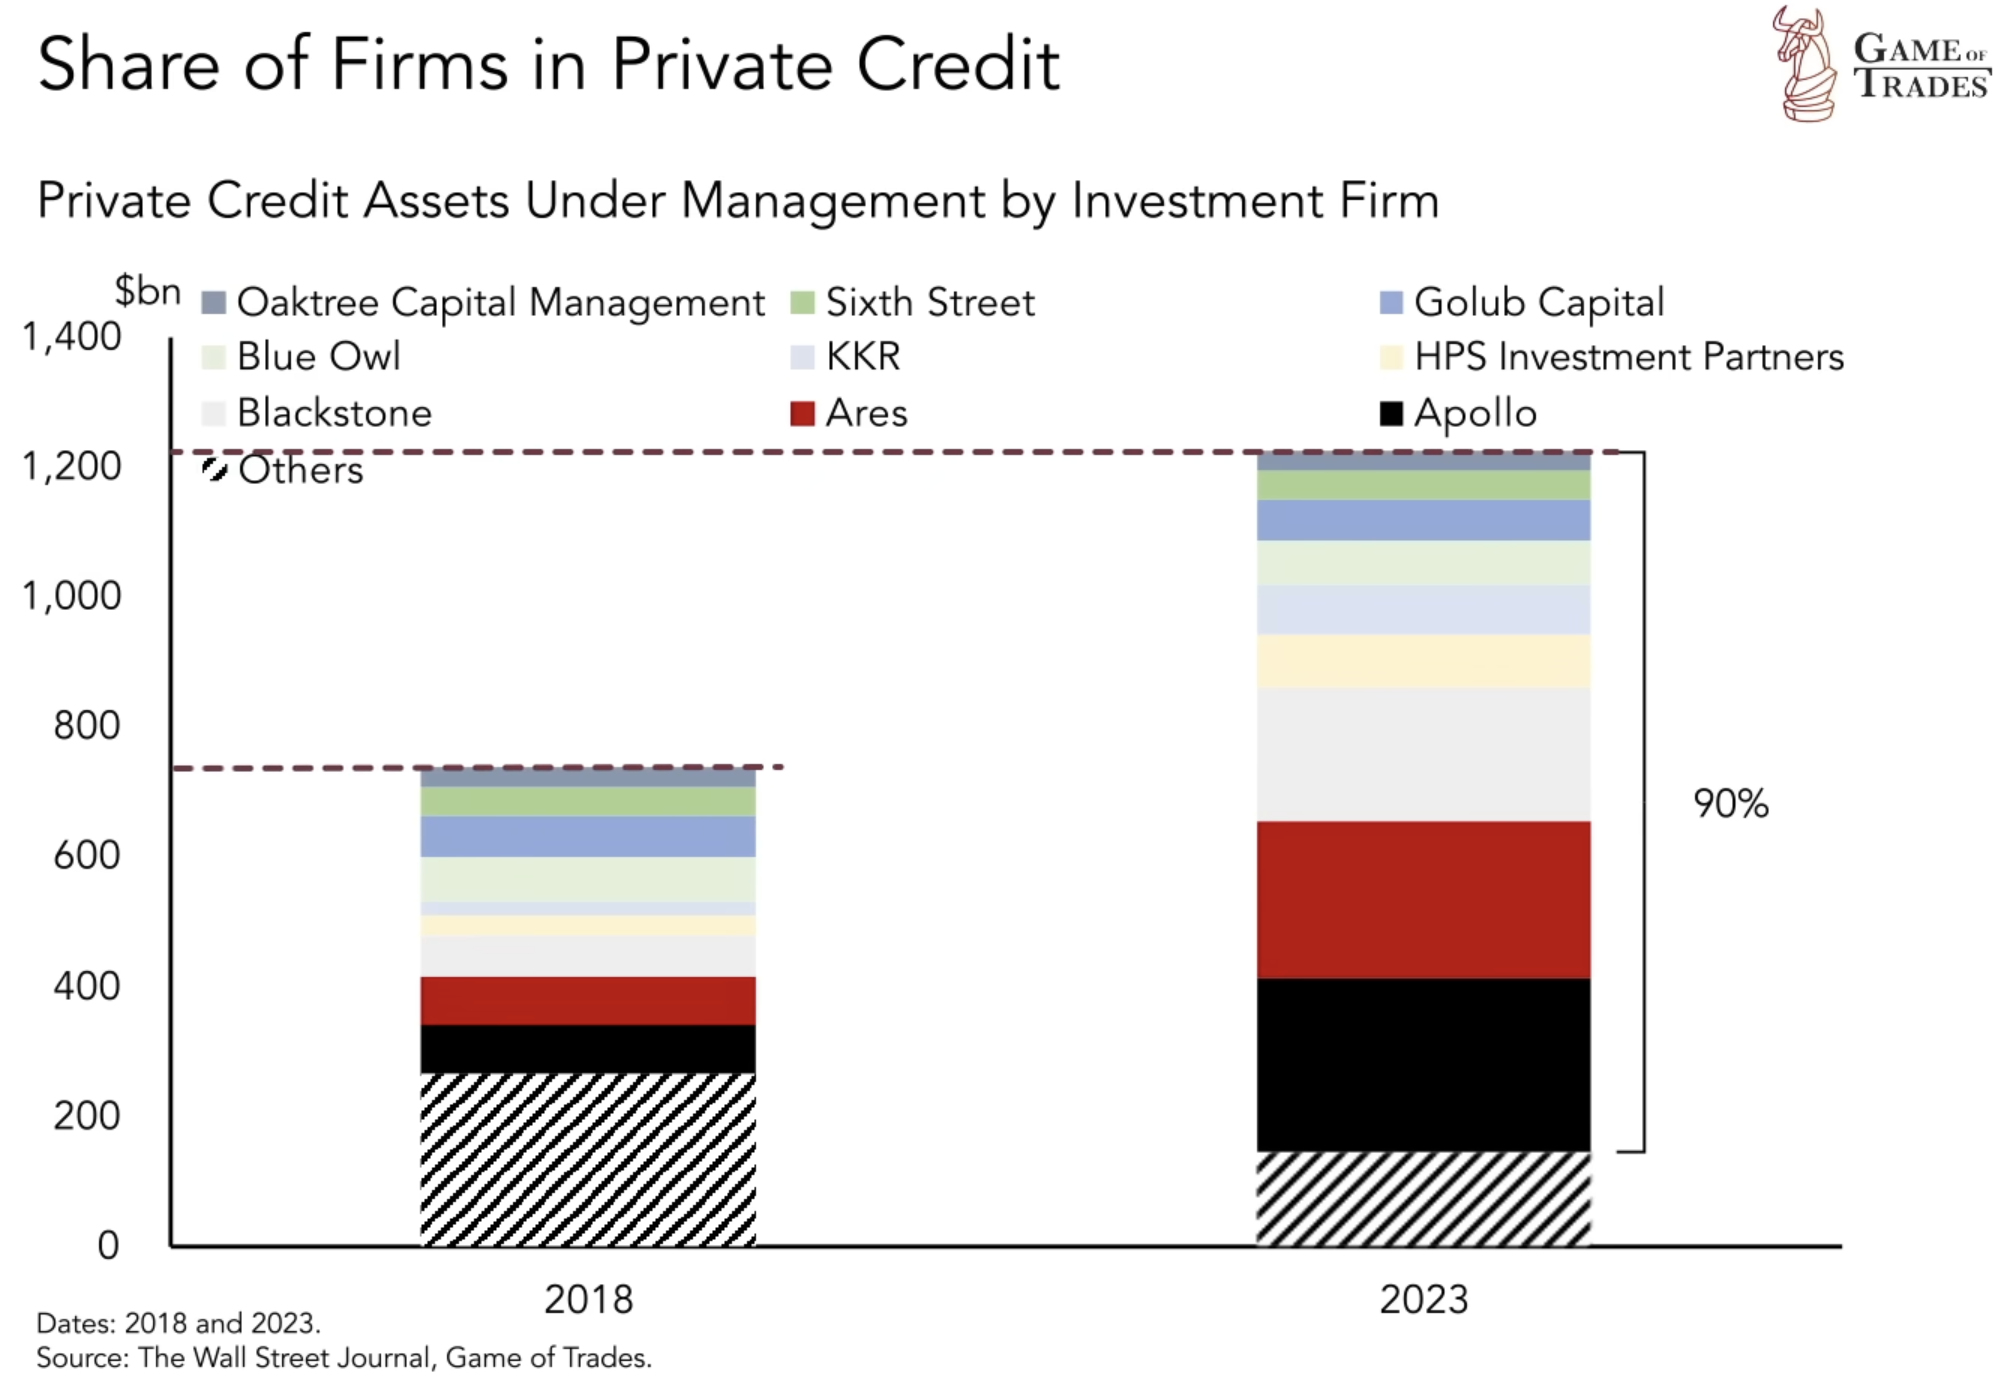 Share of firms in private credit 